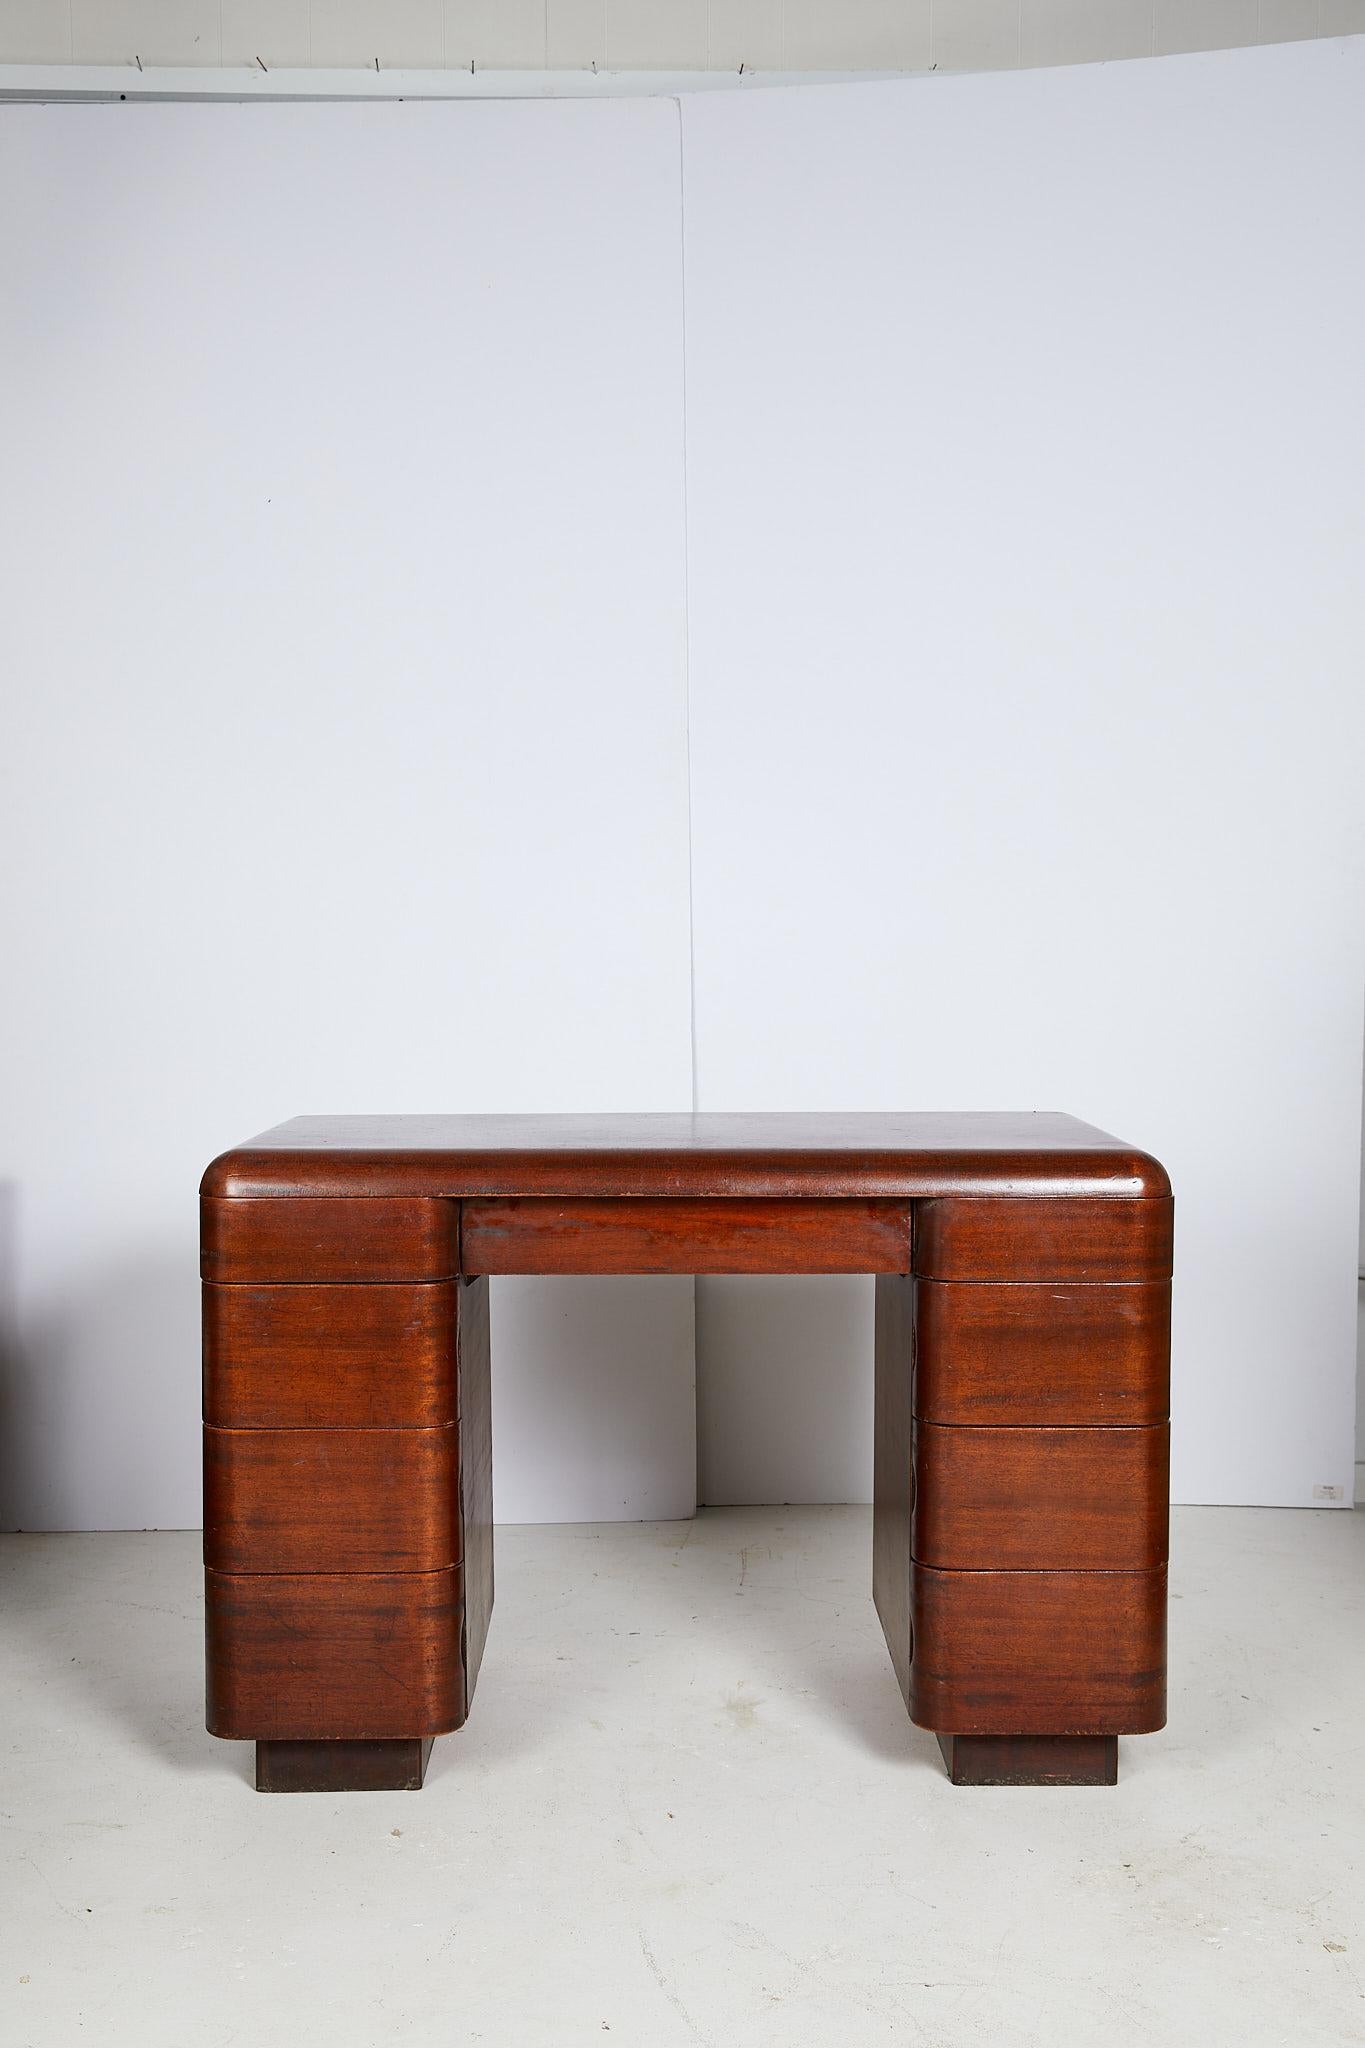 The 20th century streamlined writing desk was designed by Paul Goldman in 1946 for Plymold Co. in the Art Deco style. The bentwood desk holds a shallow center drawer flanked by pedestals with eight graduated drawers that are flushed into the case